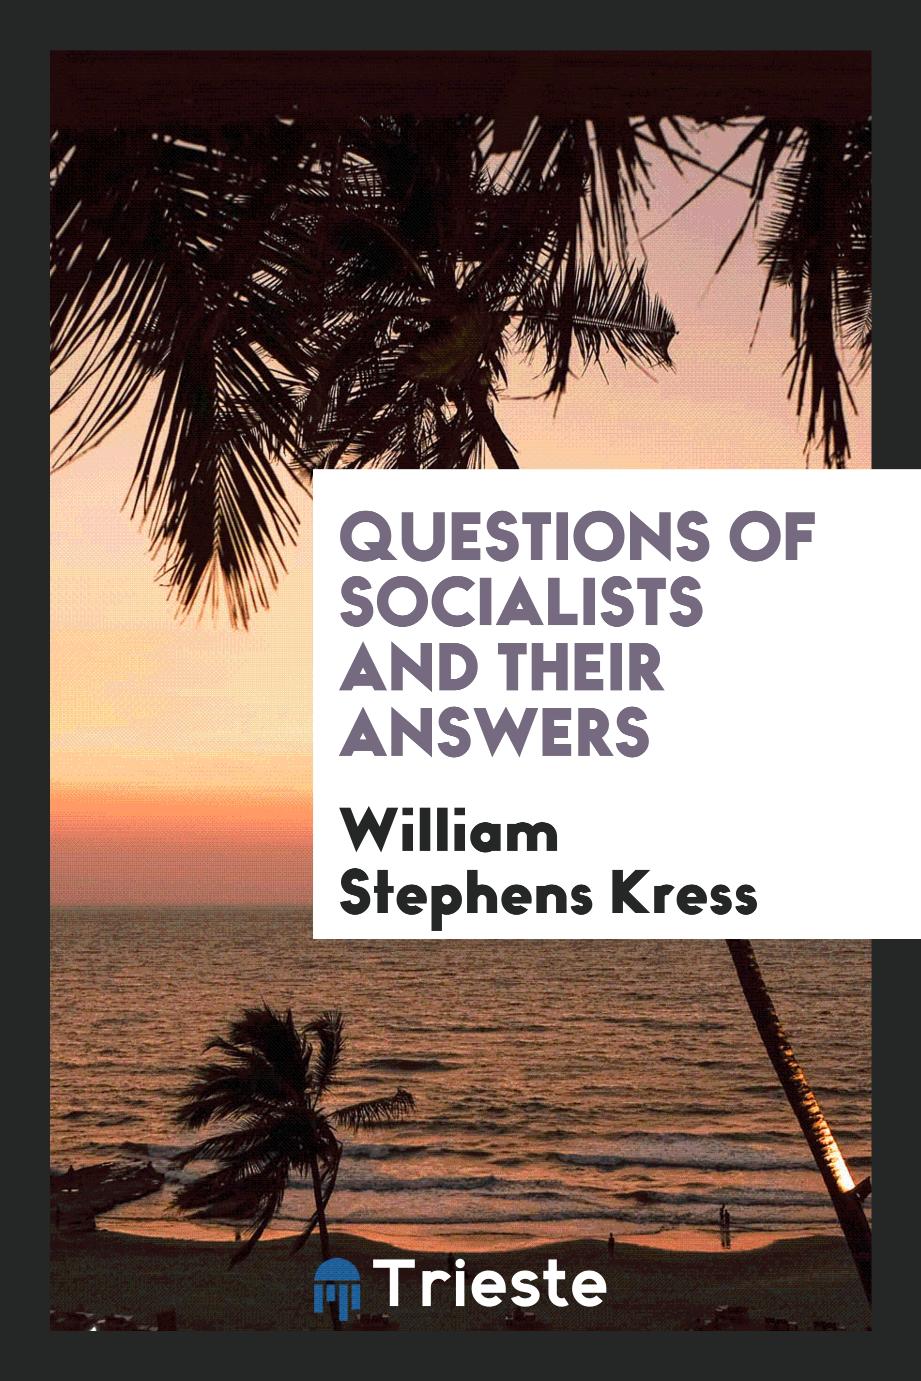 William Stephens Kress - Questions of socialists and their answers